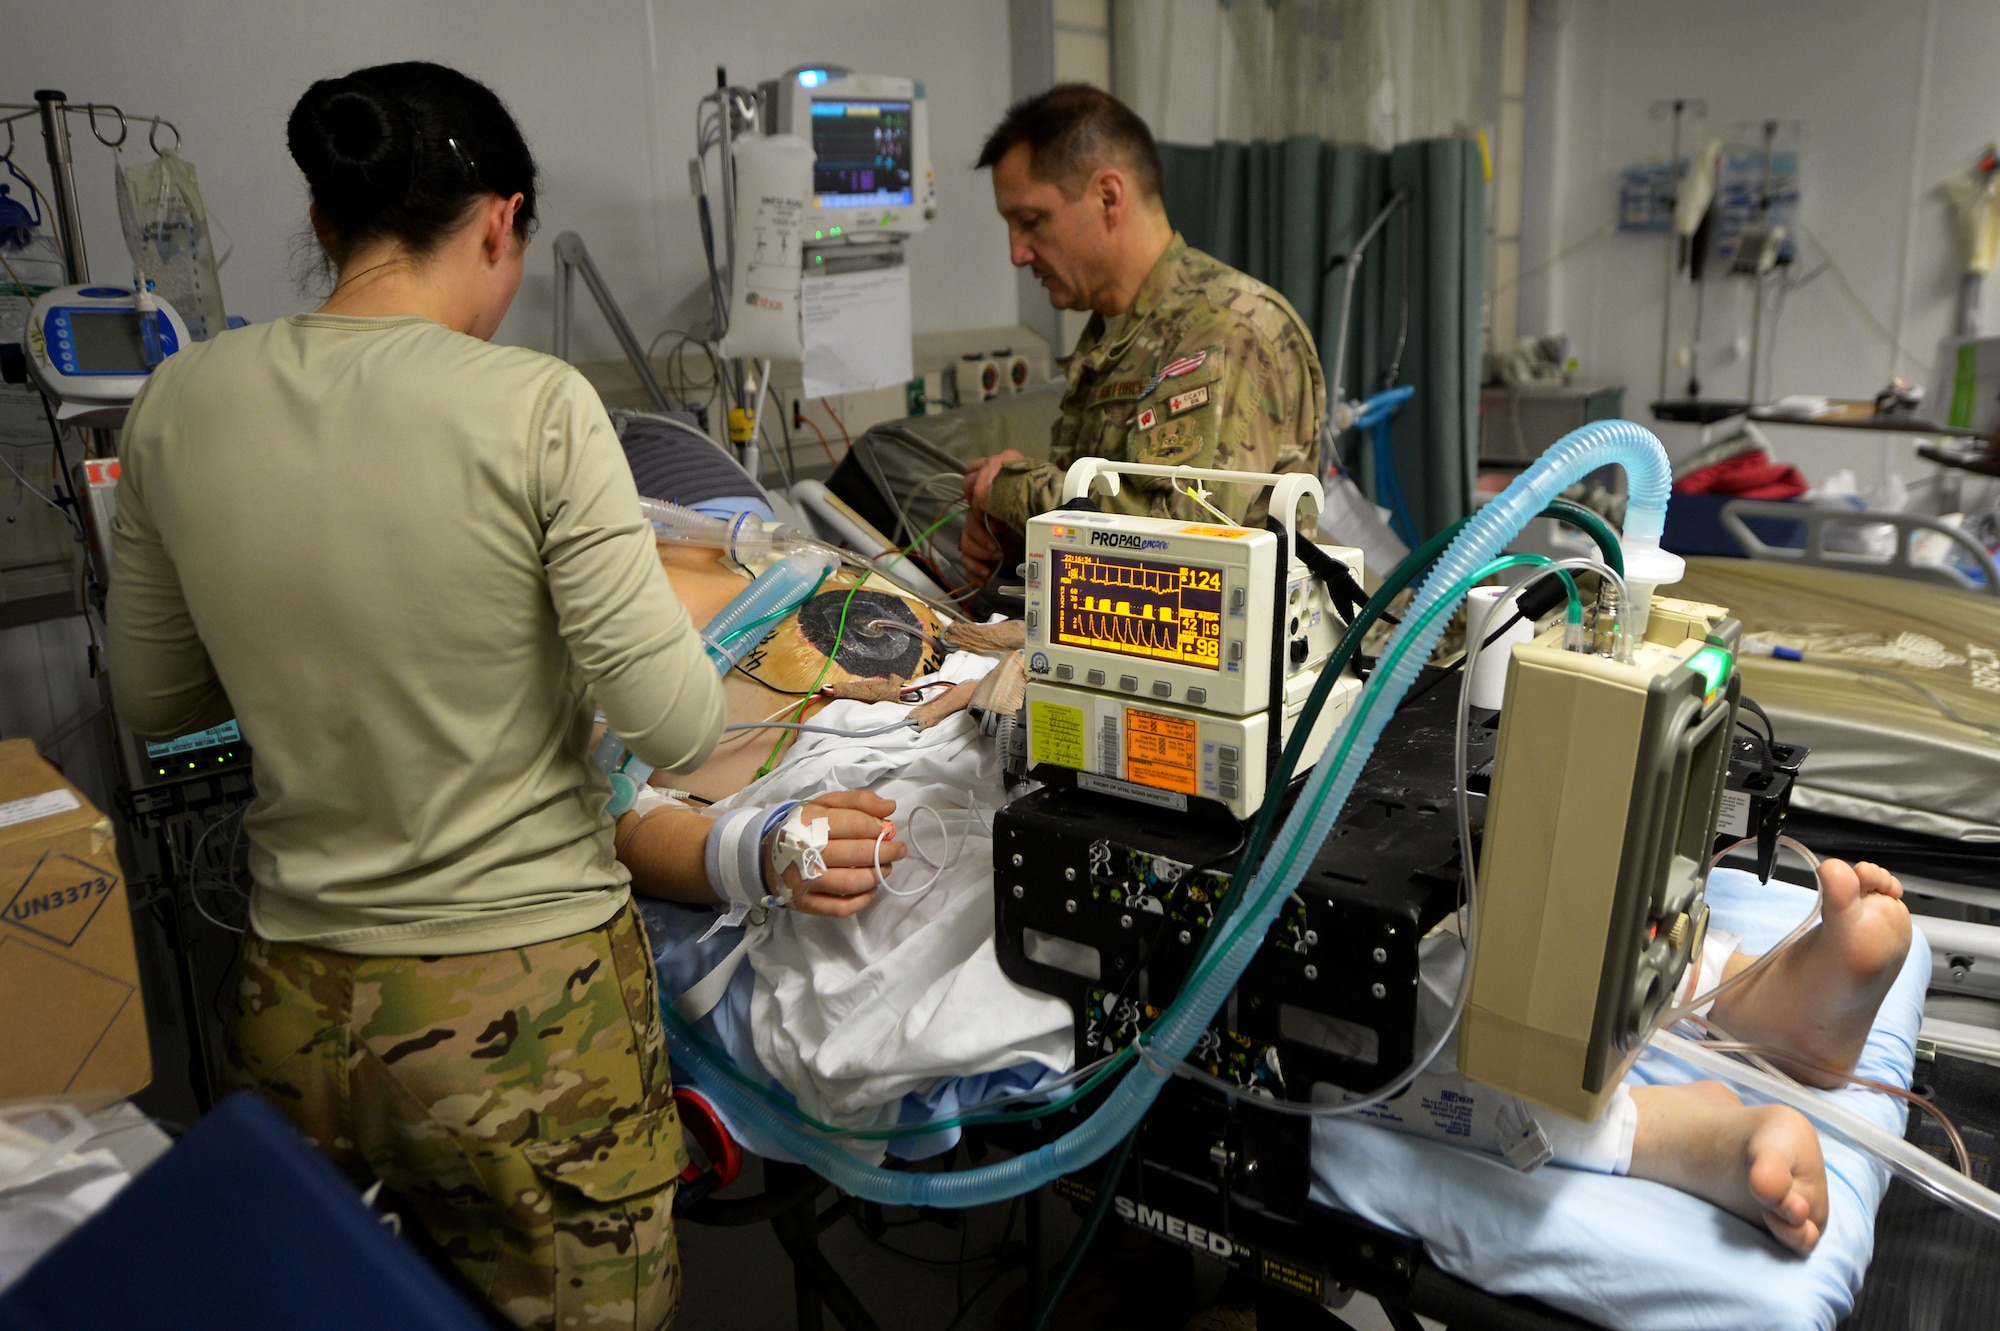 Capt. Suzanne Morris and Maj. Michael Mackovich, 455th Expeditionary Aeromedical Evacuation Squadron Critical Care Air Transport Team nurses, connect a patient to CCATT medical equipment at Bagram Airfield, Afghanistan, March 21, 2013. A CCATT crew consists of a physician, intensive care nurse and a respiratory therapist, making it possible to move severely injured or gravely ill servicemembers by air.  (U.S. Air Force photo/Senior Airman Chris Willis)